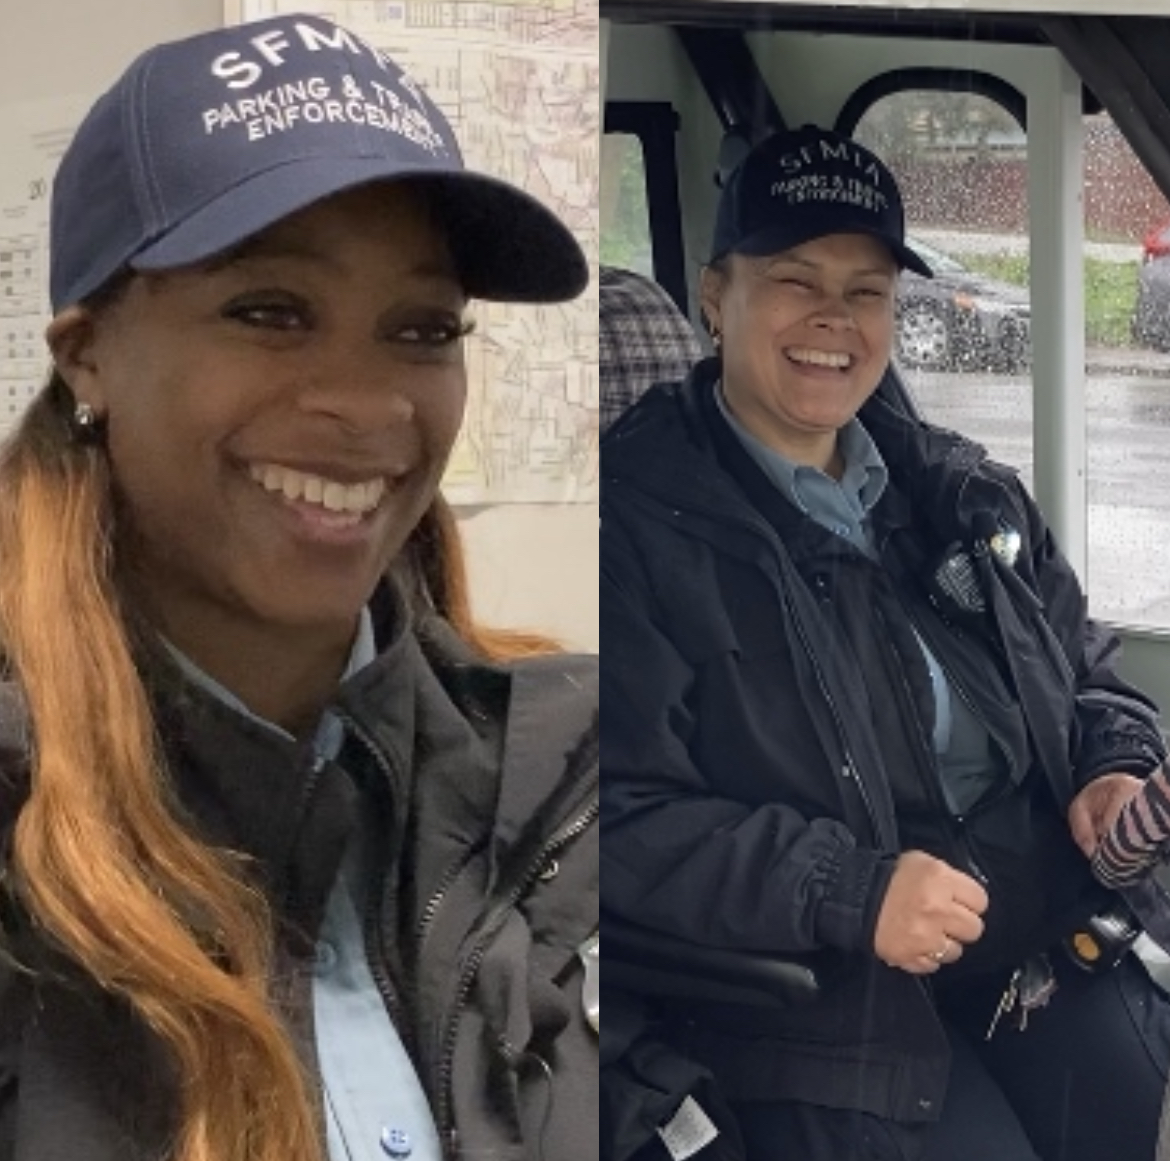 Two Parking Control Officers side by side smiling in an office setting and while sitting in a parking enforcement vehicle. 